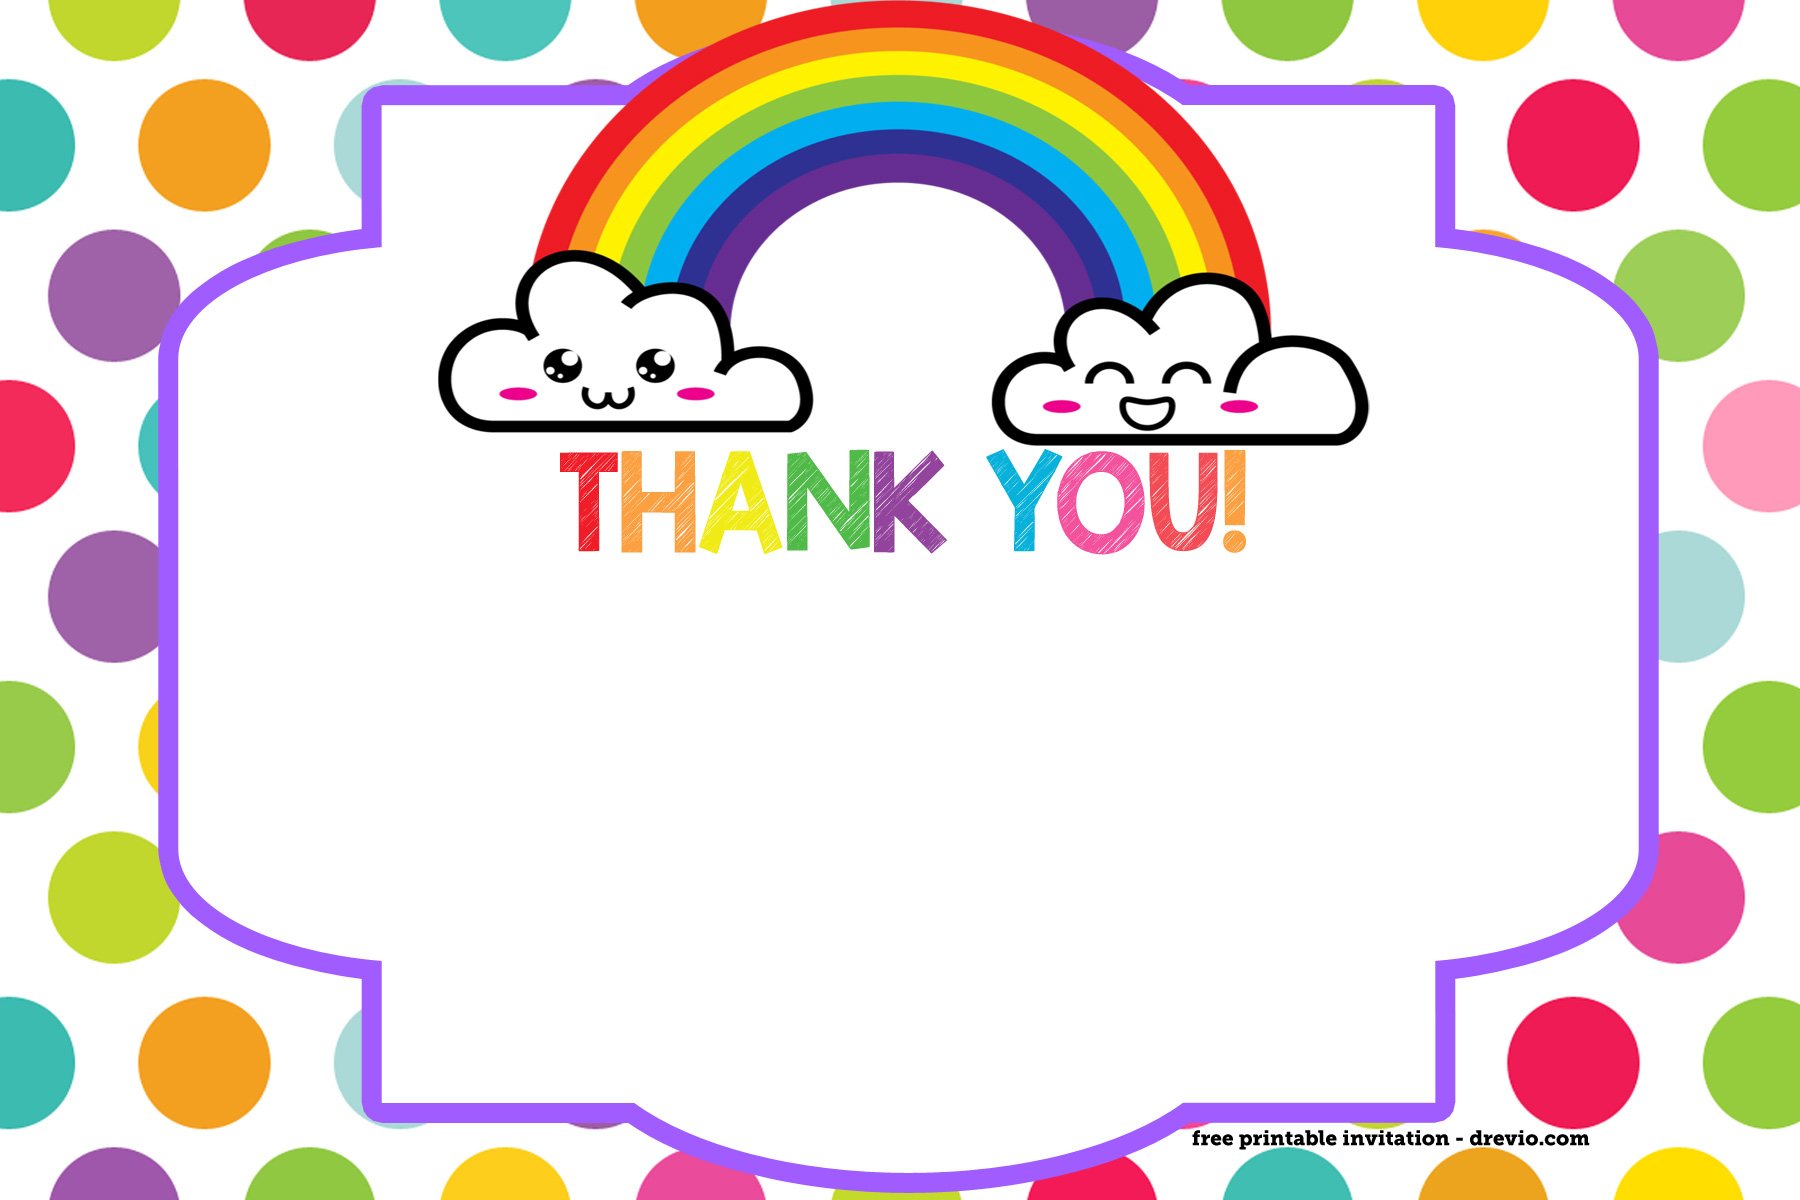 free-printable-rainbow-invitation-template-thank-you-card-download